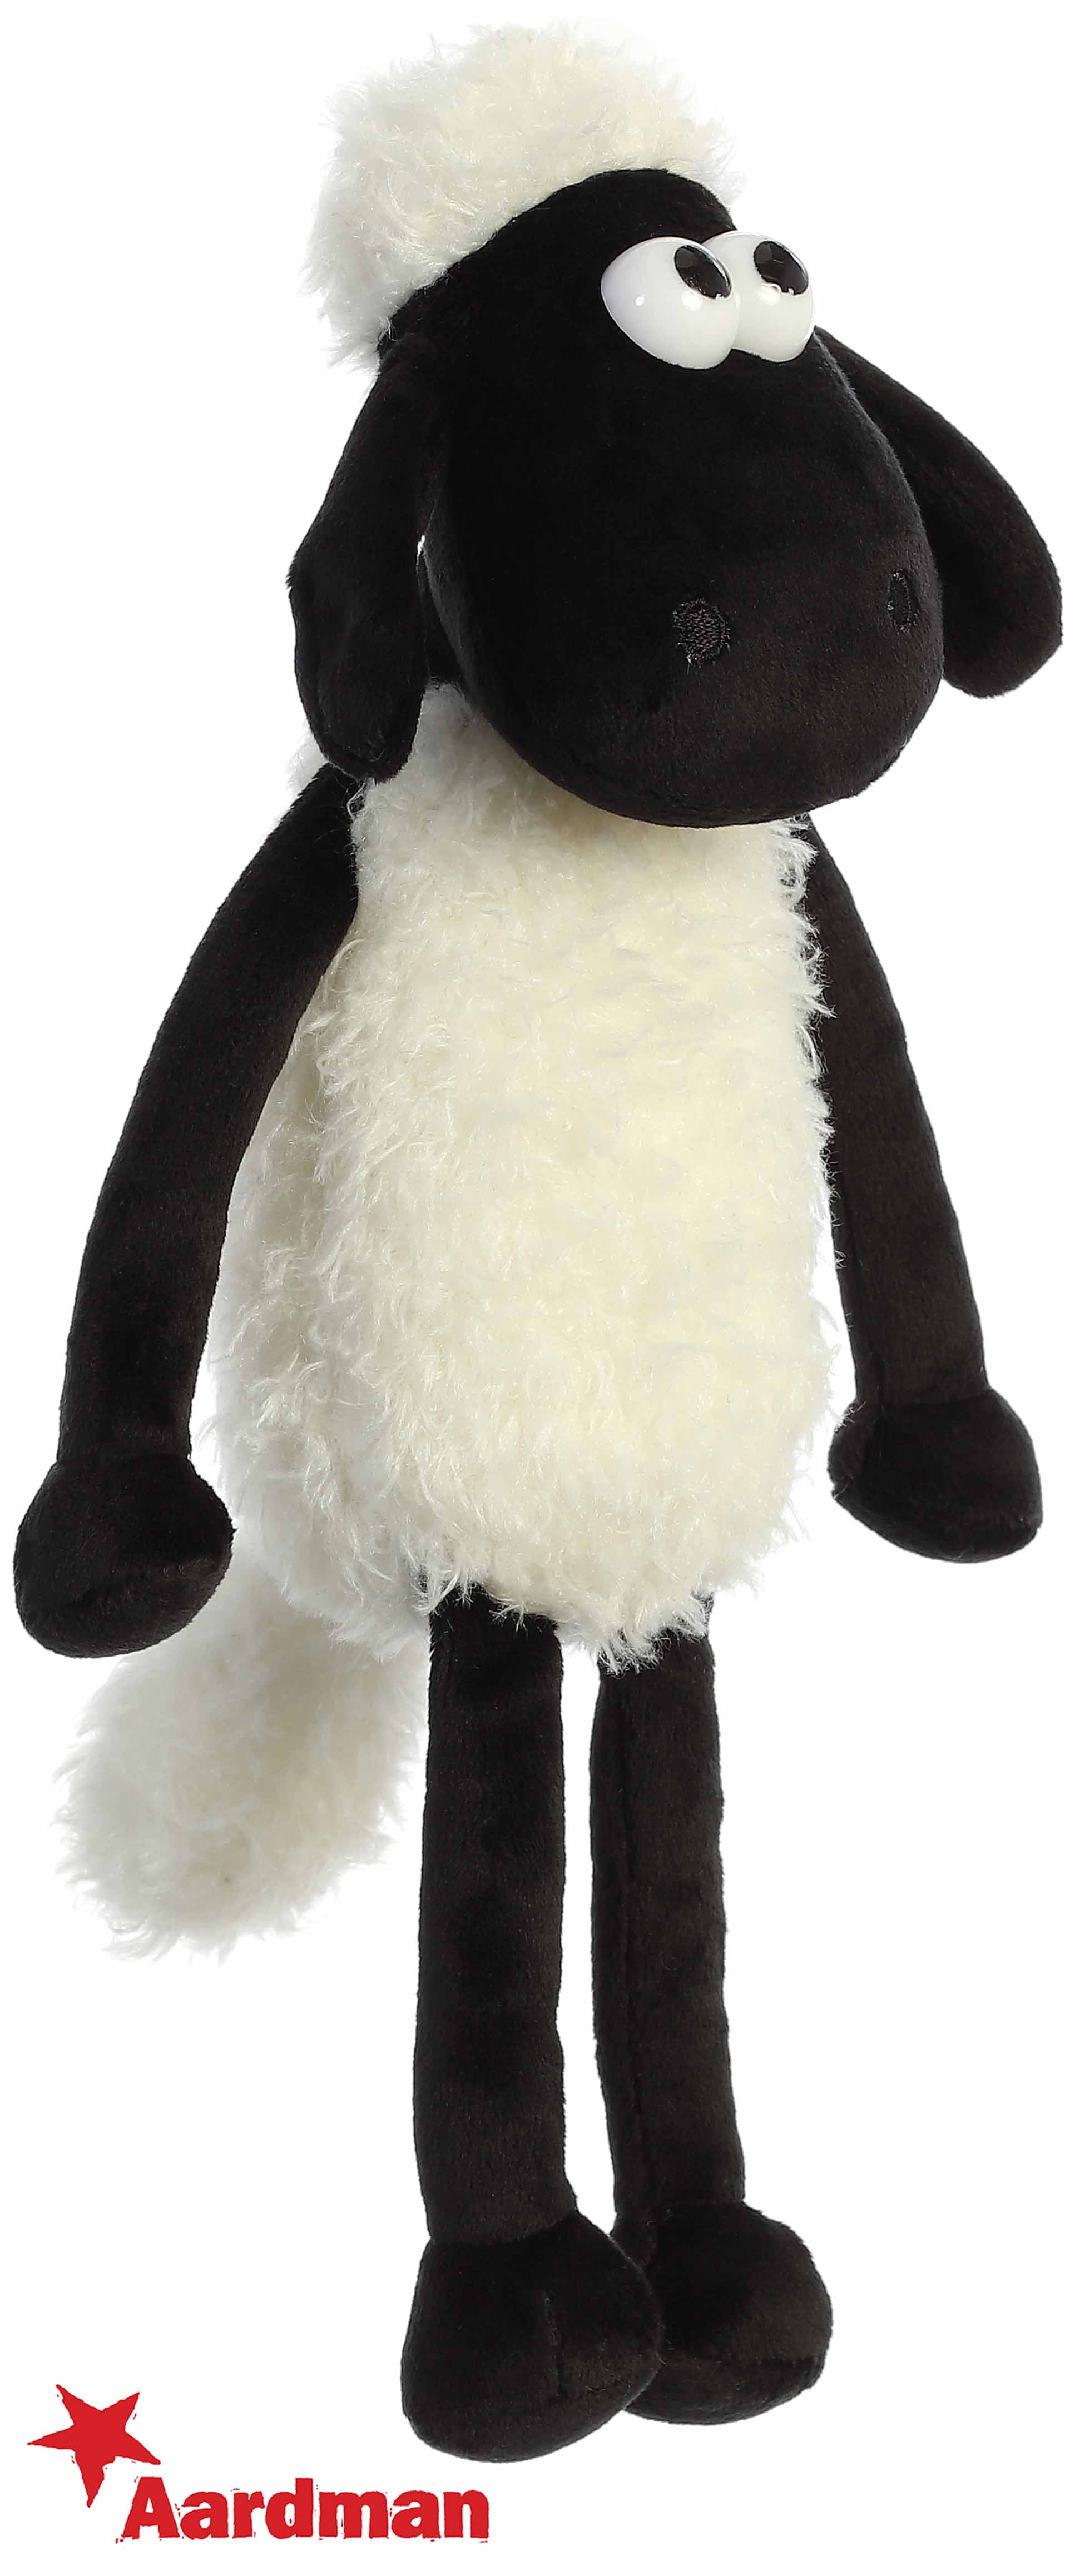 AURORA SHAUN THE SHEEP 12" SUPER SOFT TOY PLUSH BRAND NEW WITH TAGS 